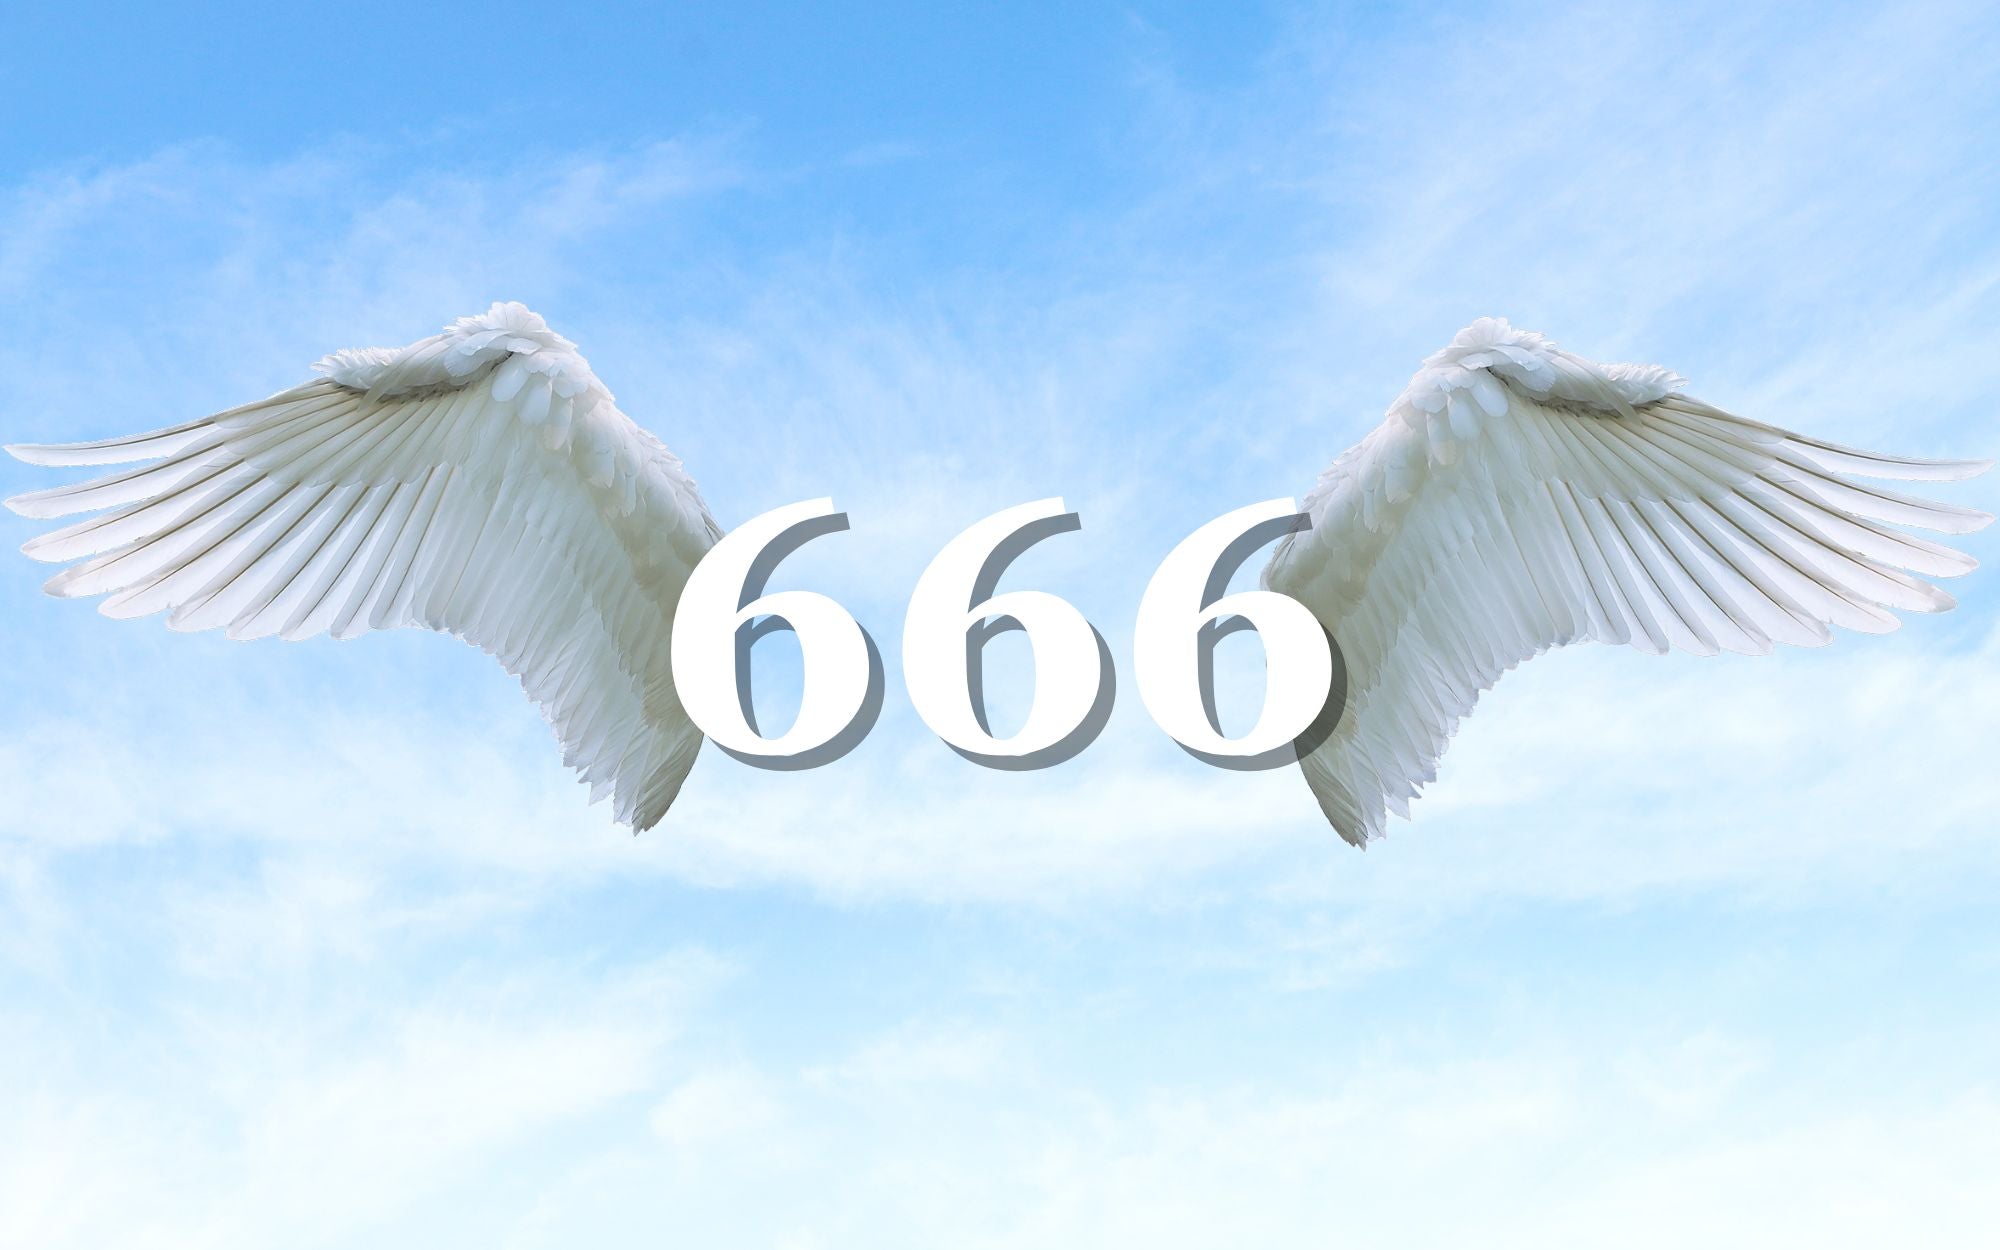 angel numbers meaning - 666